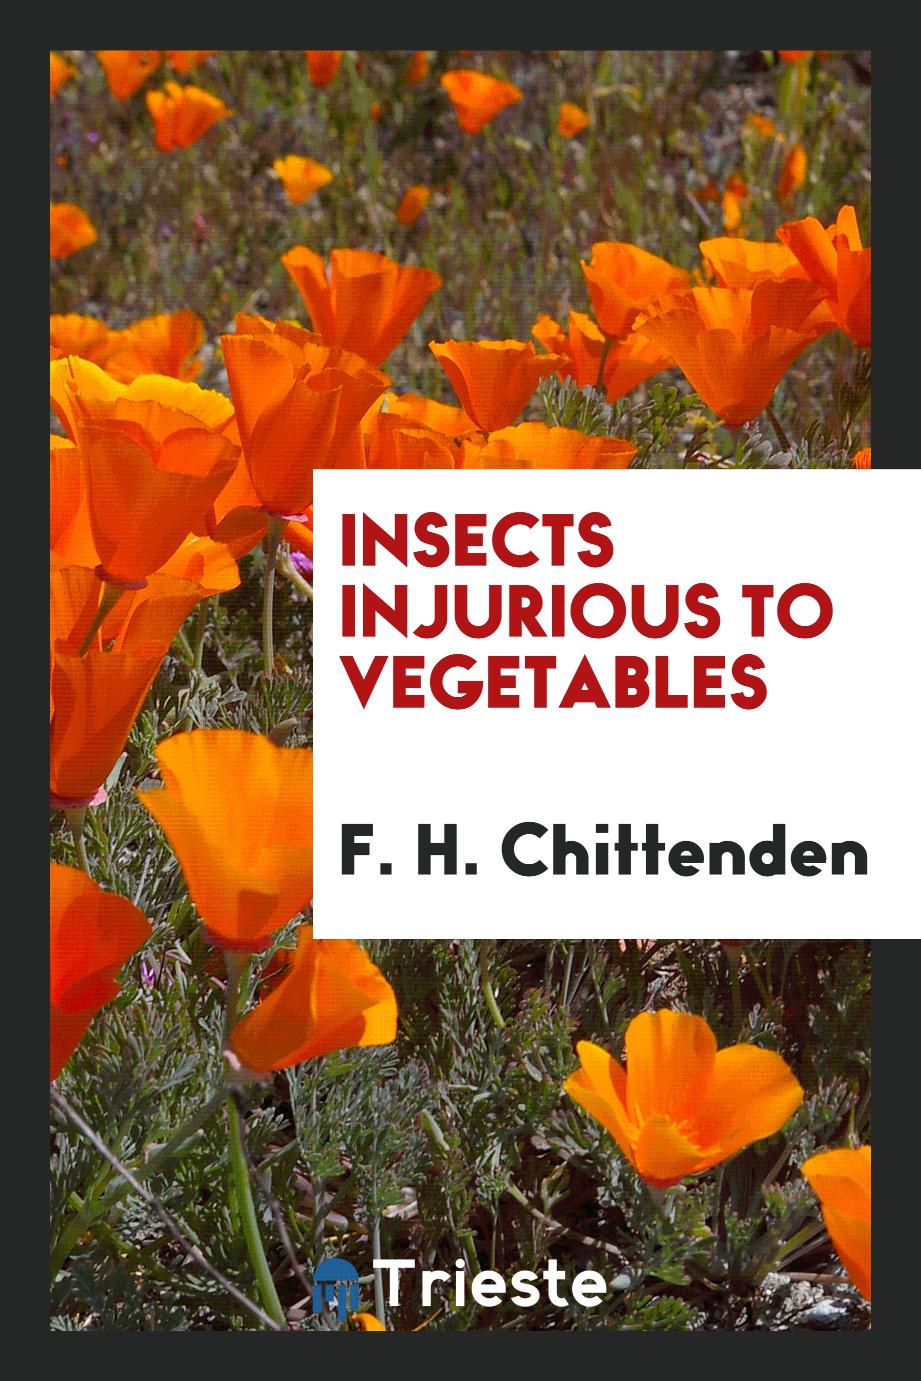 Insects injurious to vegetables